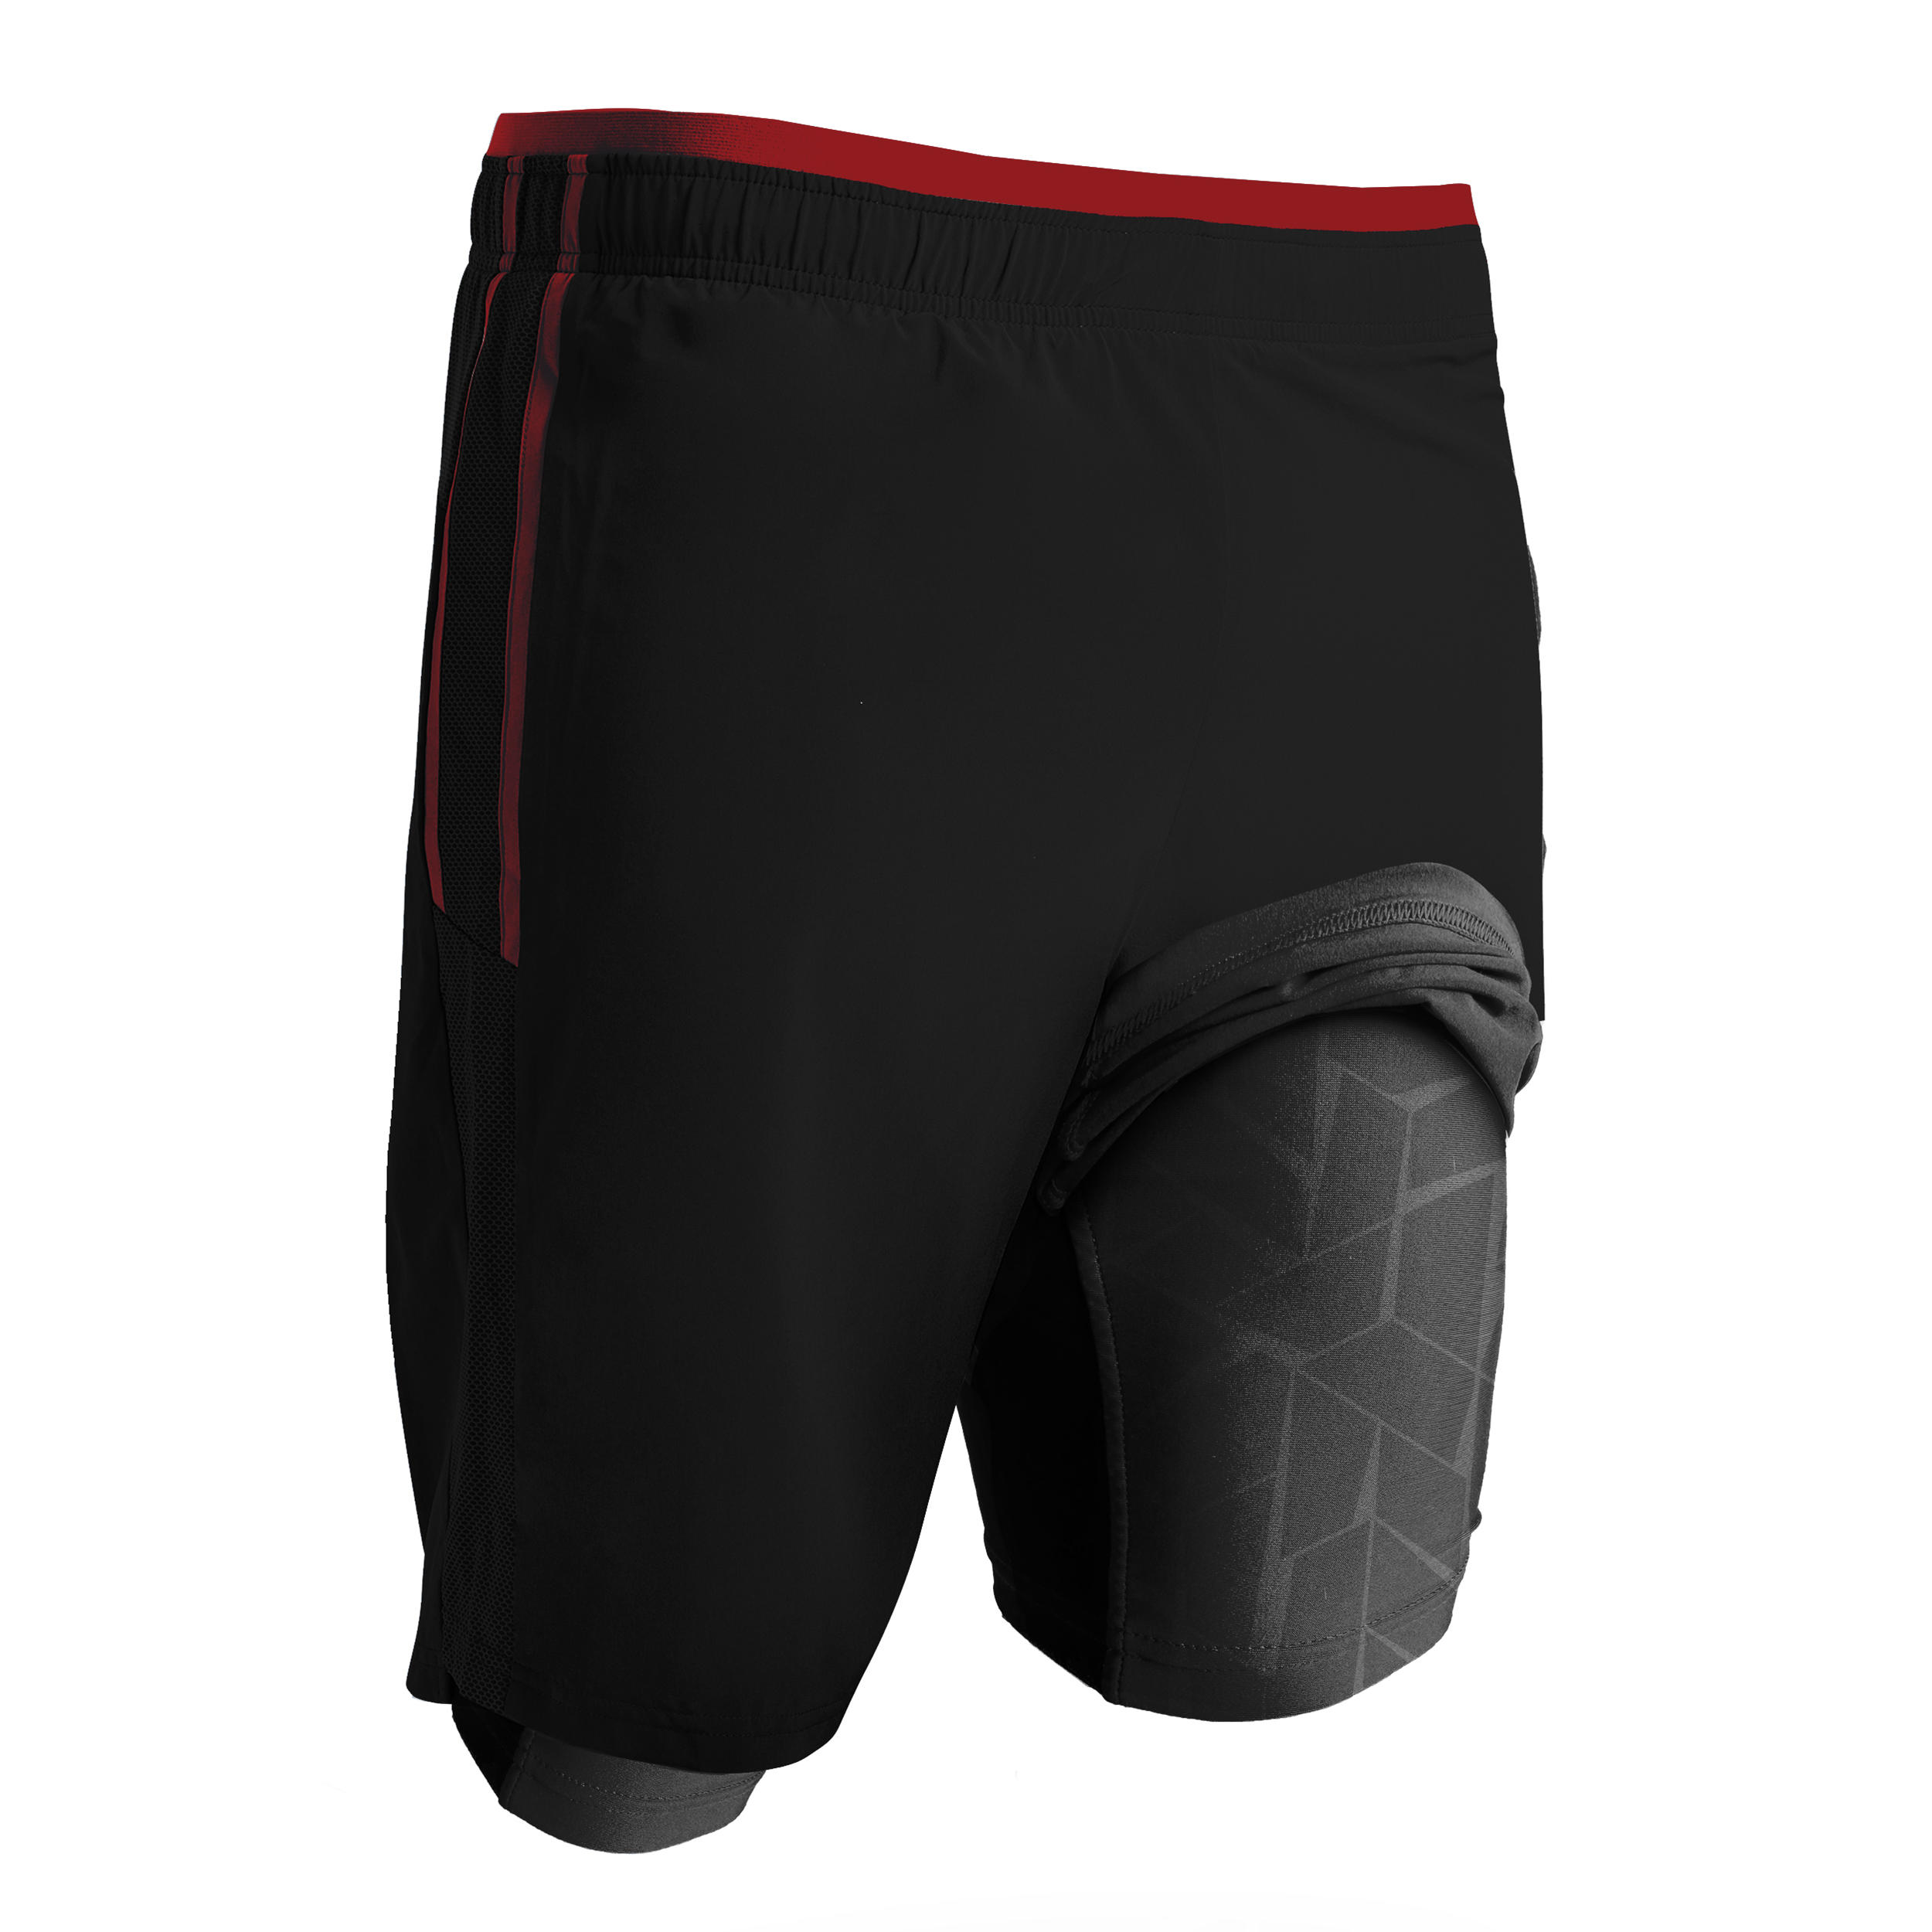 Adult 3-in-1 Football Shorts Traxium - Black/Red 1/9